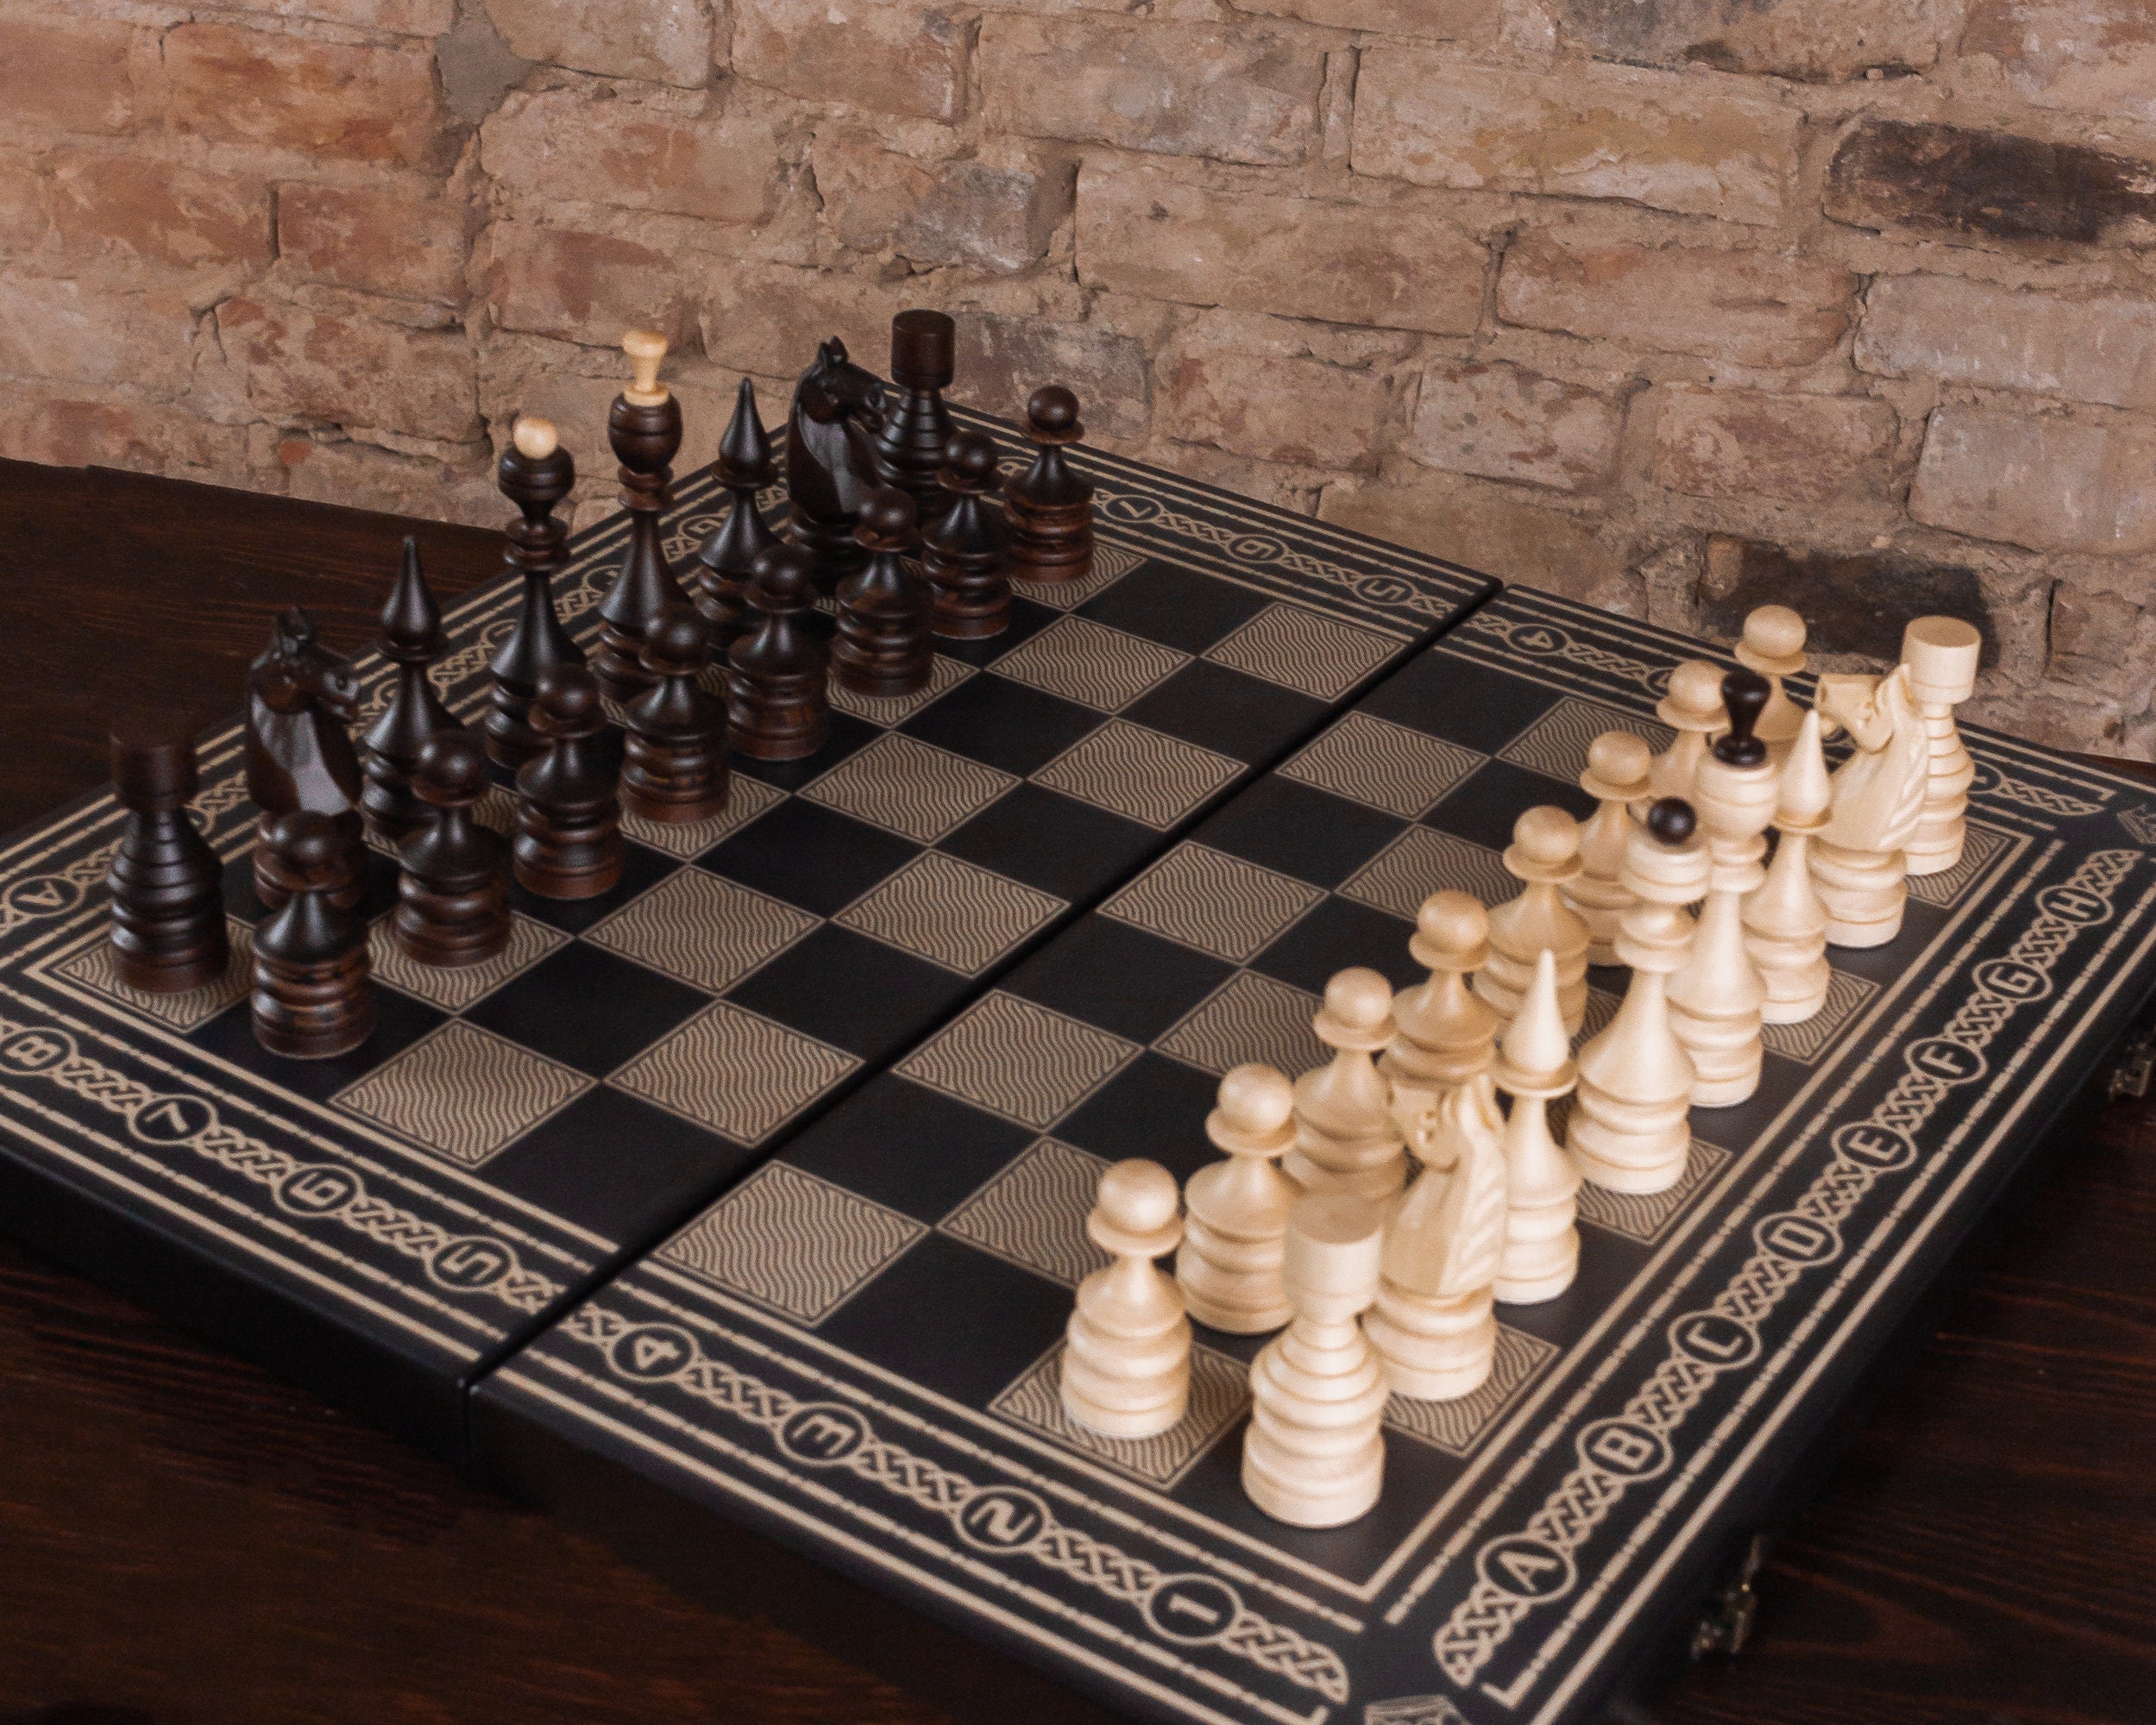 Handcrafted wooden chess set - Noblie - luxury gift store